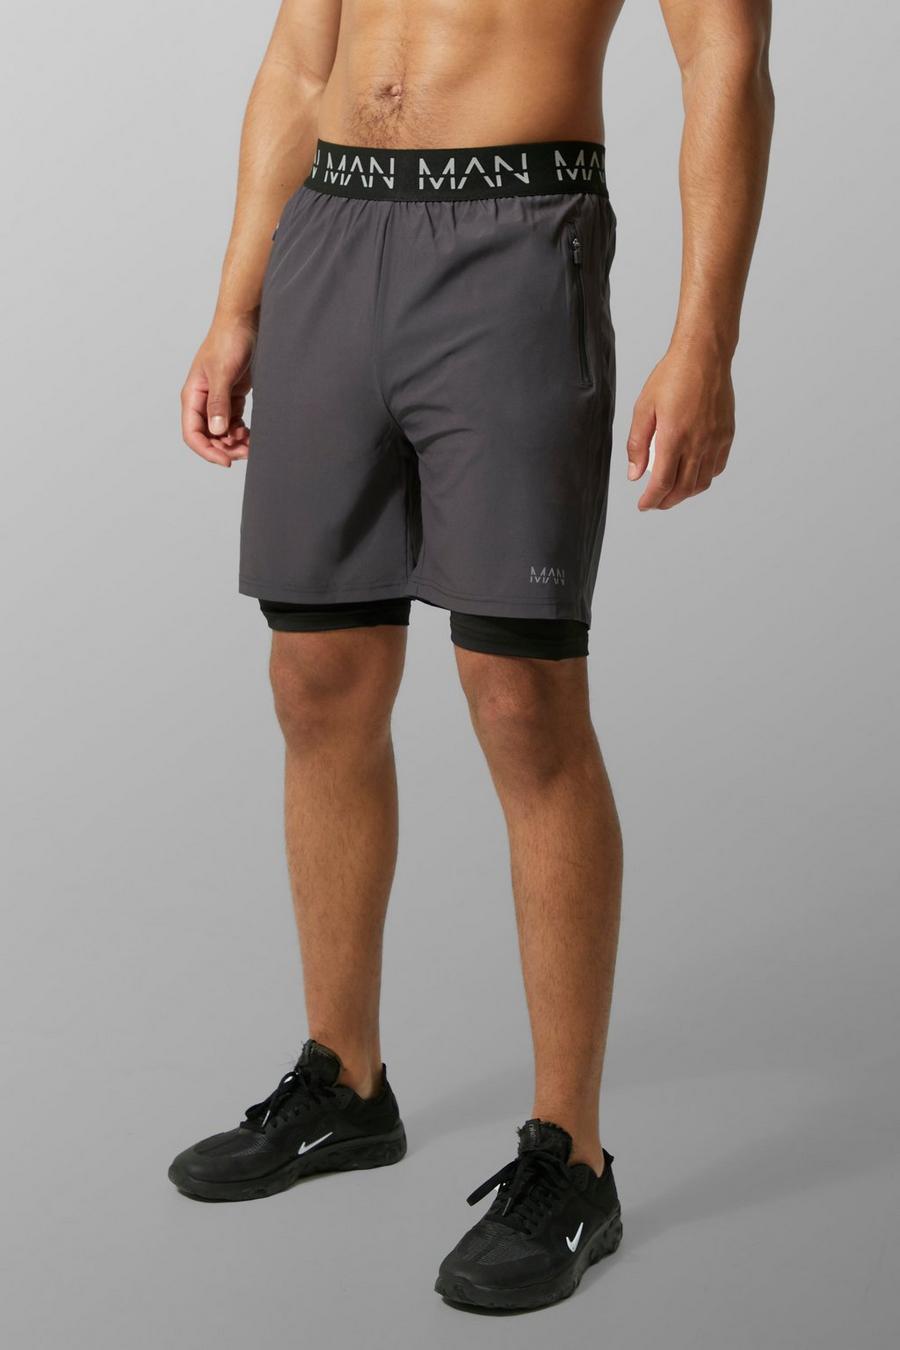 Charcoal gris Tall Man Active Gym 2-in-1 Short